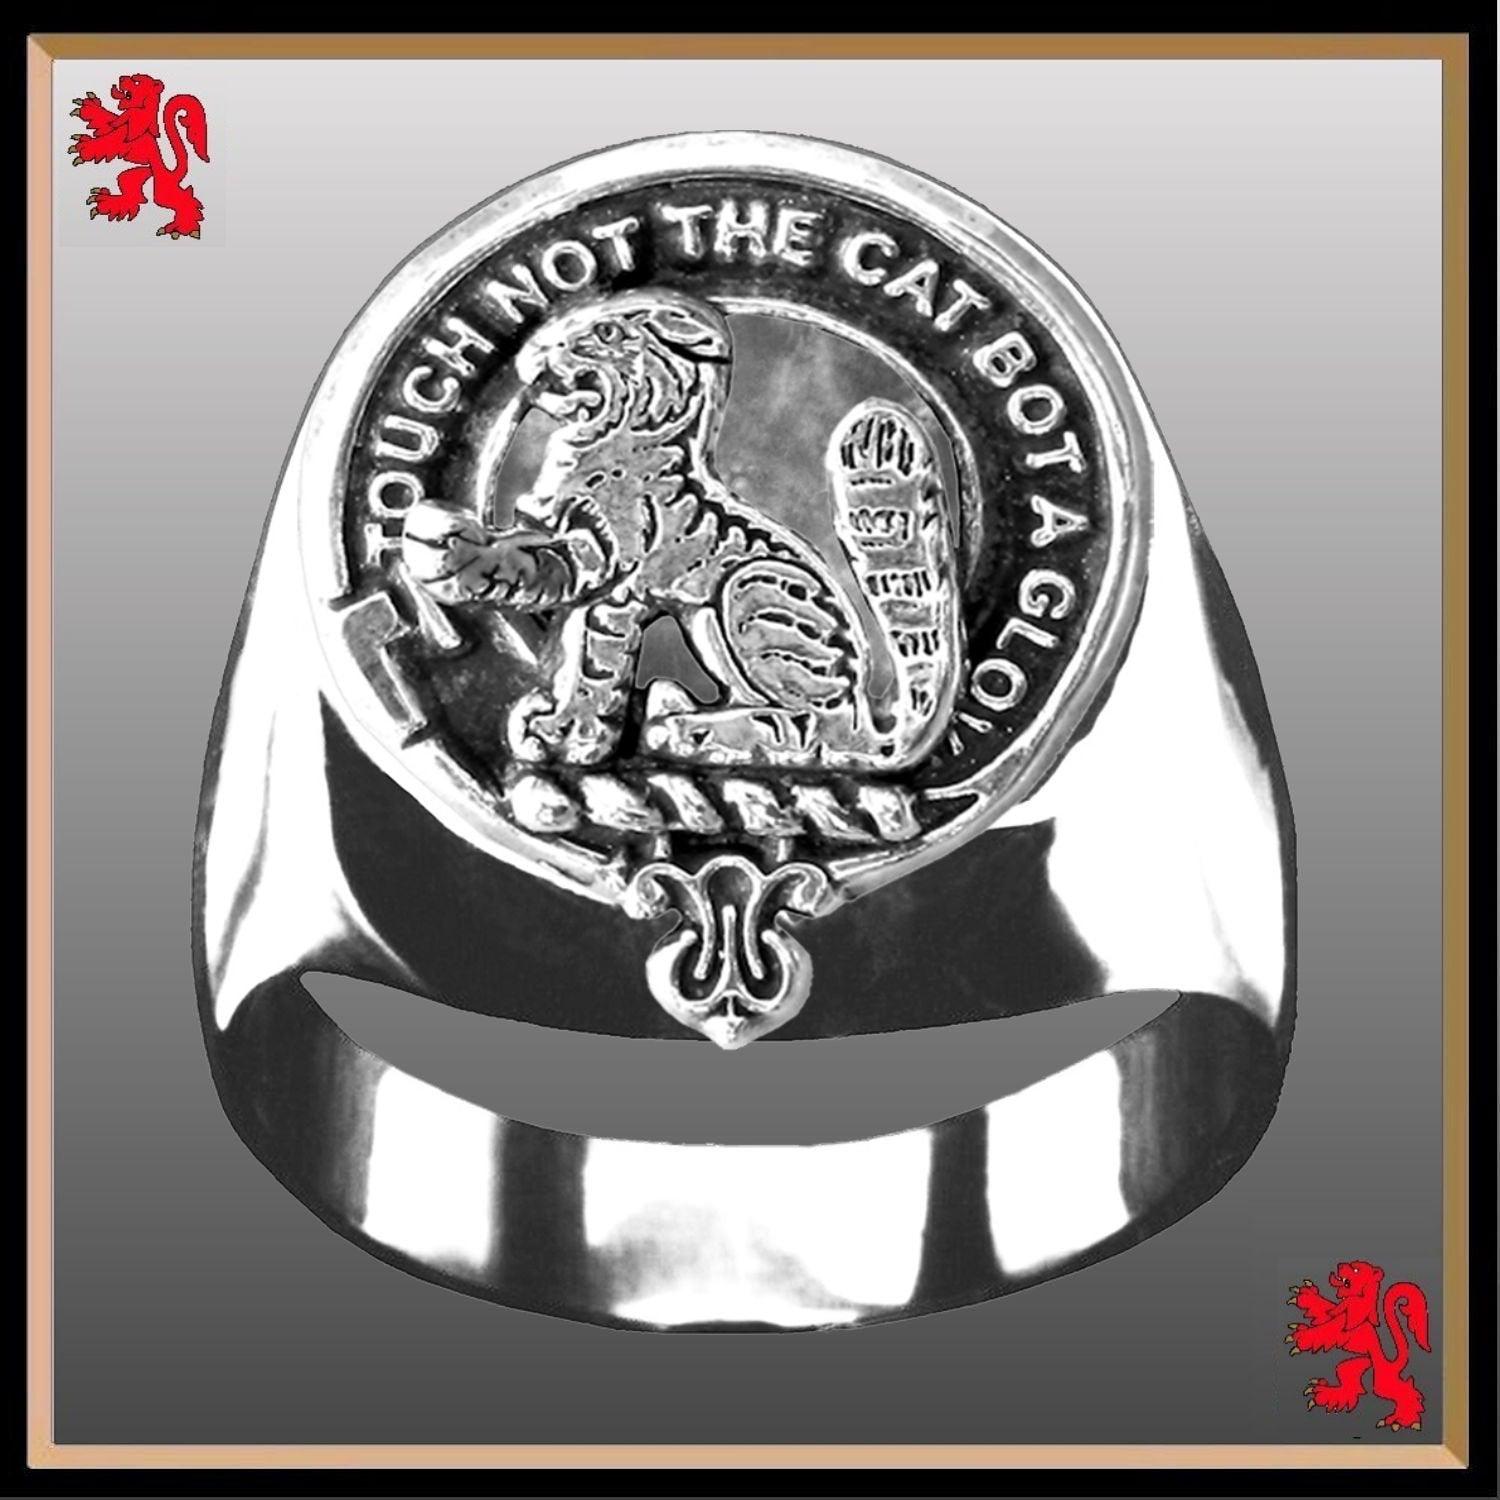 Gow Scottish Clan Crest Ring GC100  ~  Sterling Silver and Karat Gold